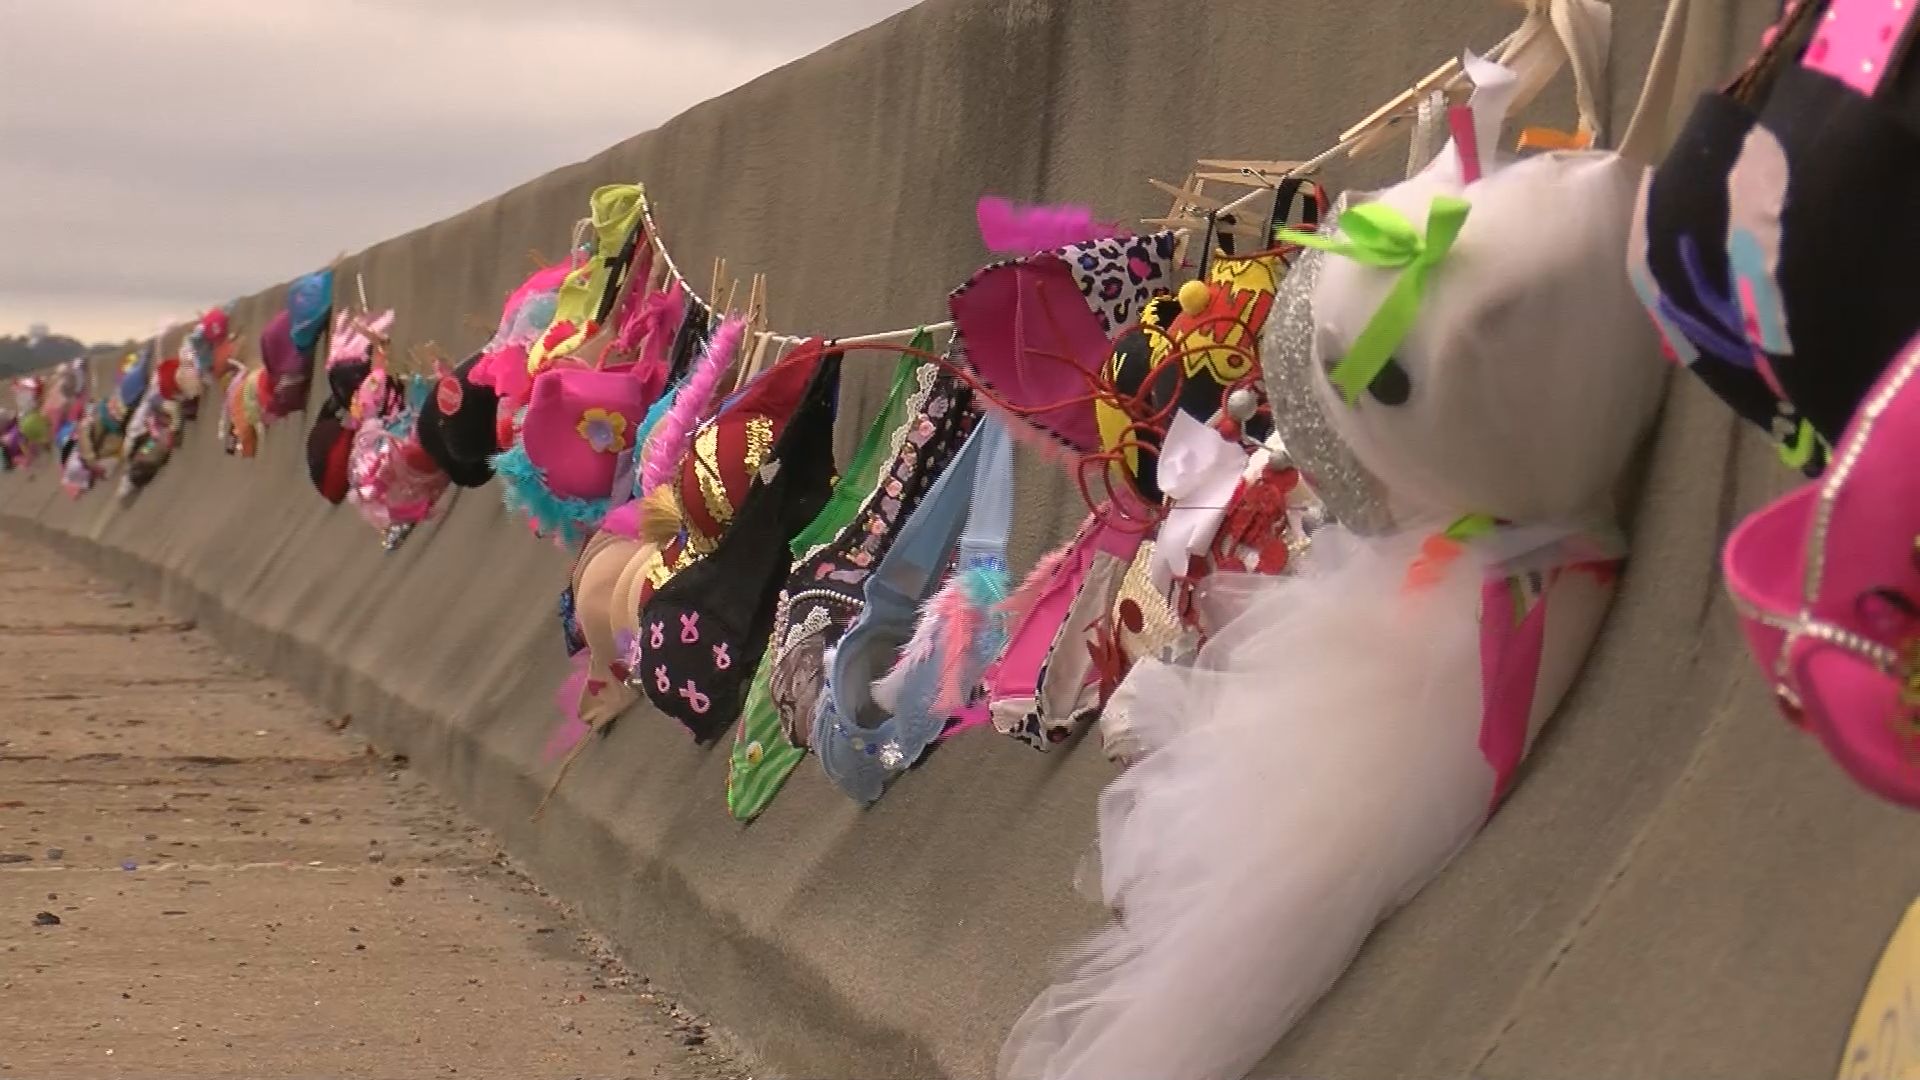 BRAs of the Bay Raises Awareness for Rights of Breast Cancer